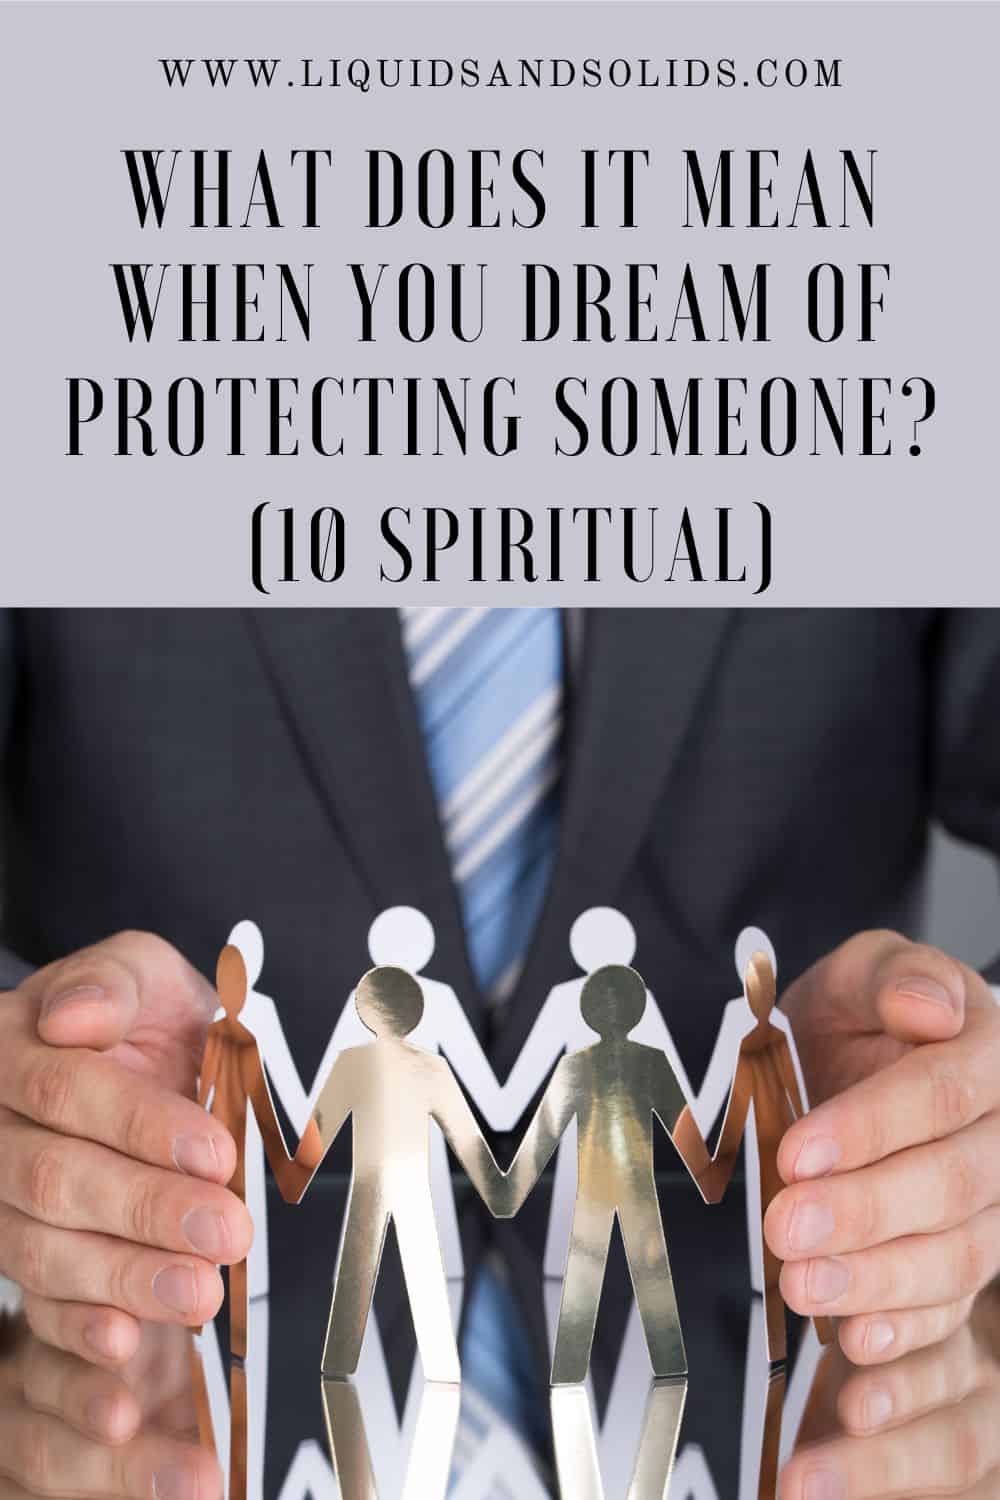 What Does It Mean When You Dream Of Protecting Someone (10 Spiritual)